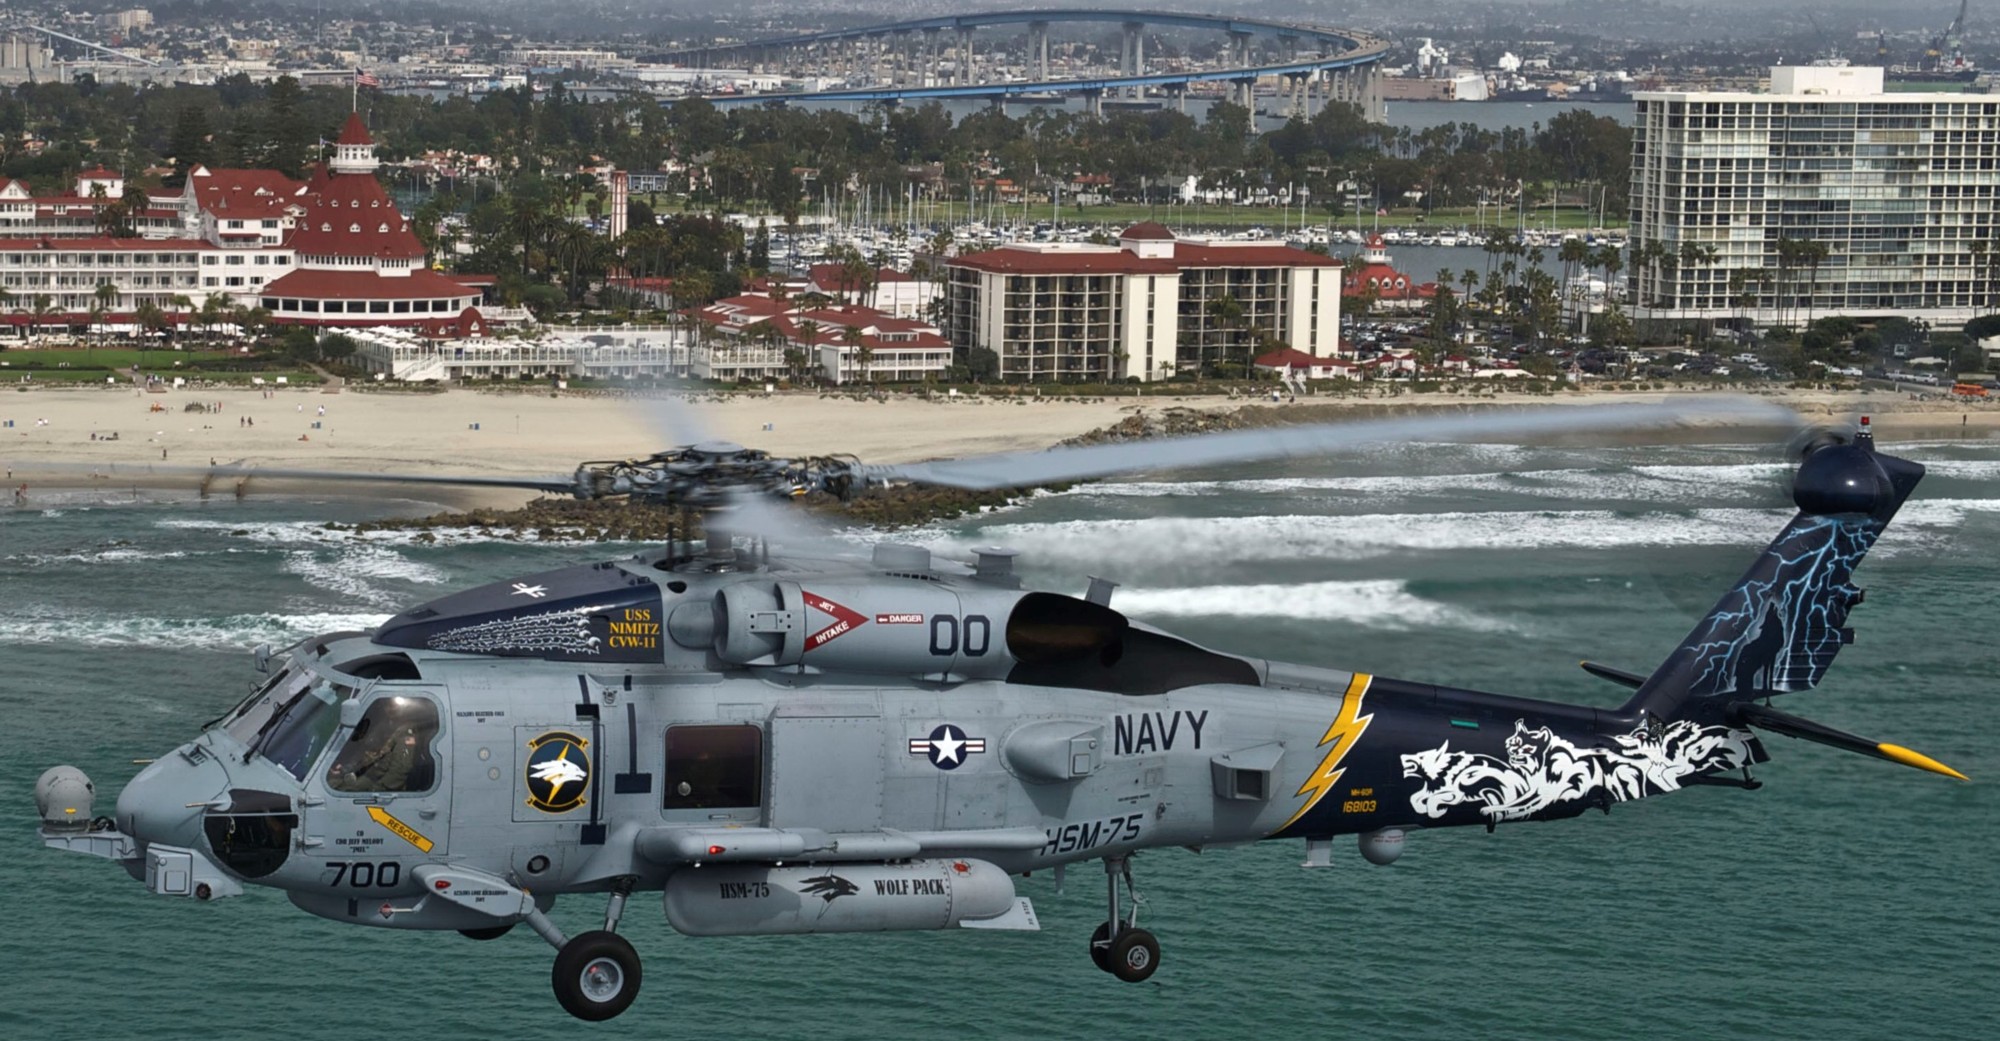 hsm-75 wolfpack helicopter maritime strike squadron us navy sikorsky mh-60r seahawk nas north island san diego california